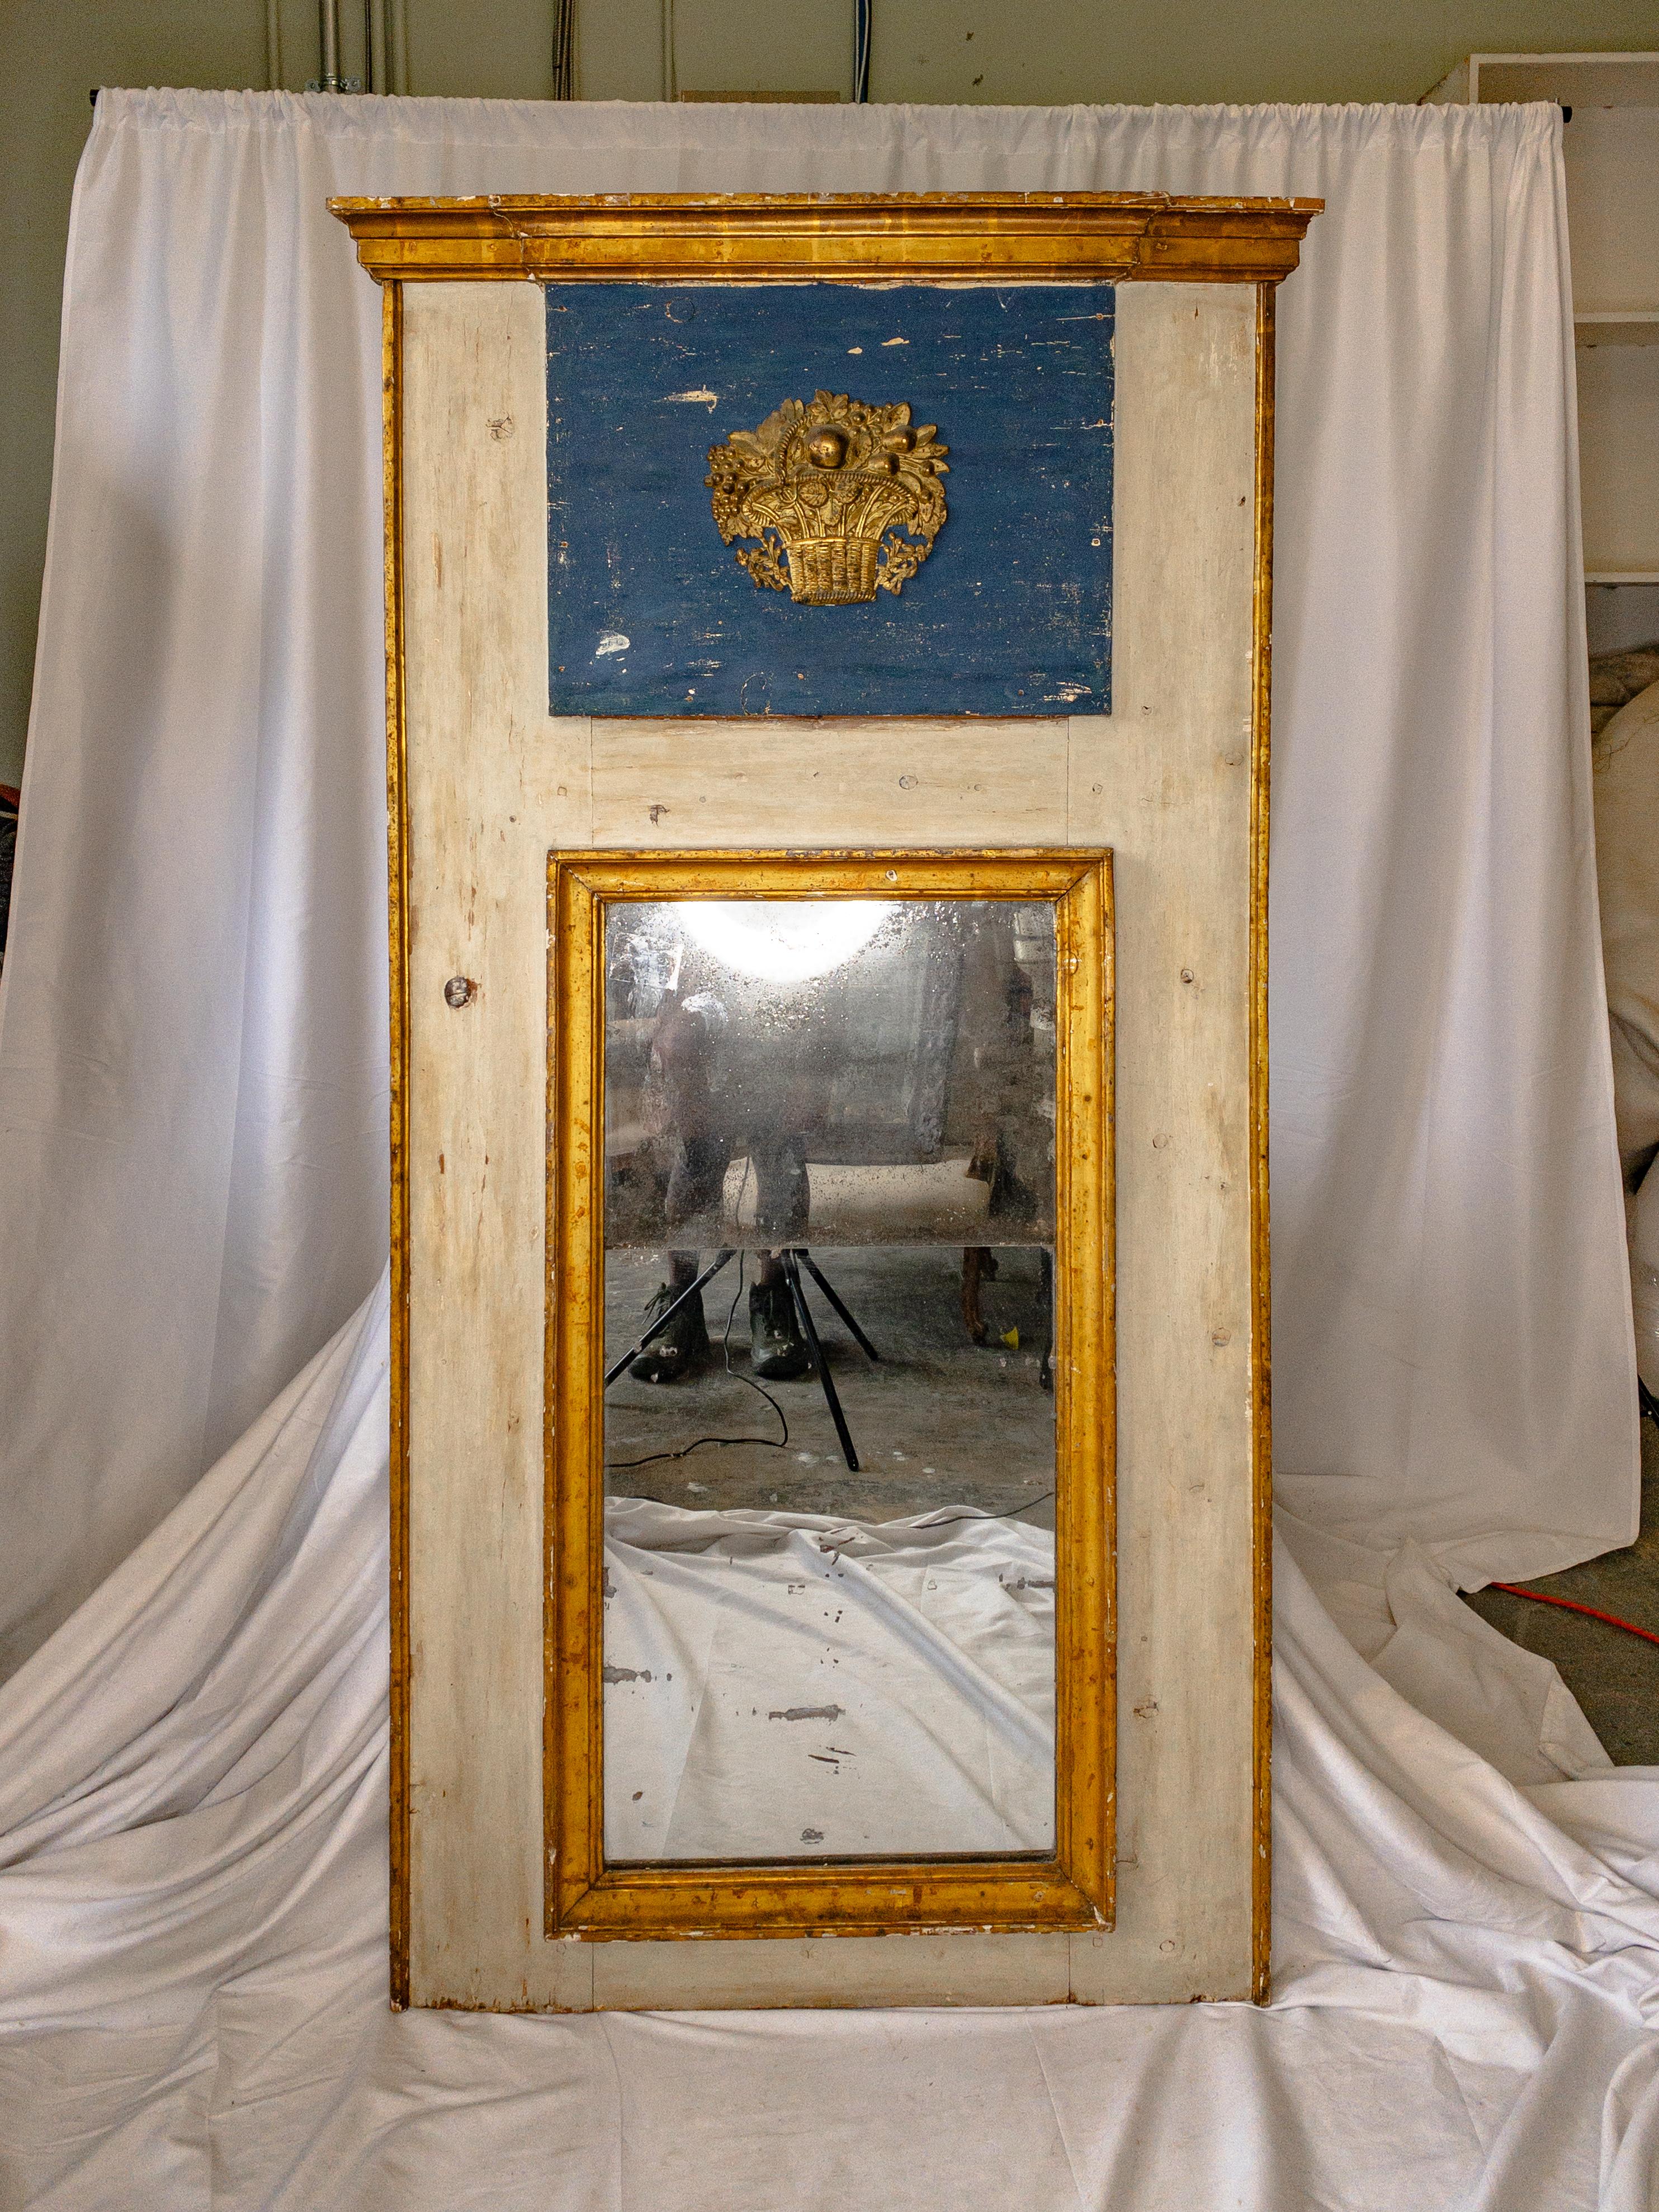 This late 18th-century Italian trumeau mirror is a stunning exemplar of neoclassical elegance. Its elongated form, painted in a serene antique white hue, exudes a sense of grace and refinement. The focal point of the mirror, positioned at the top